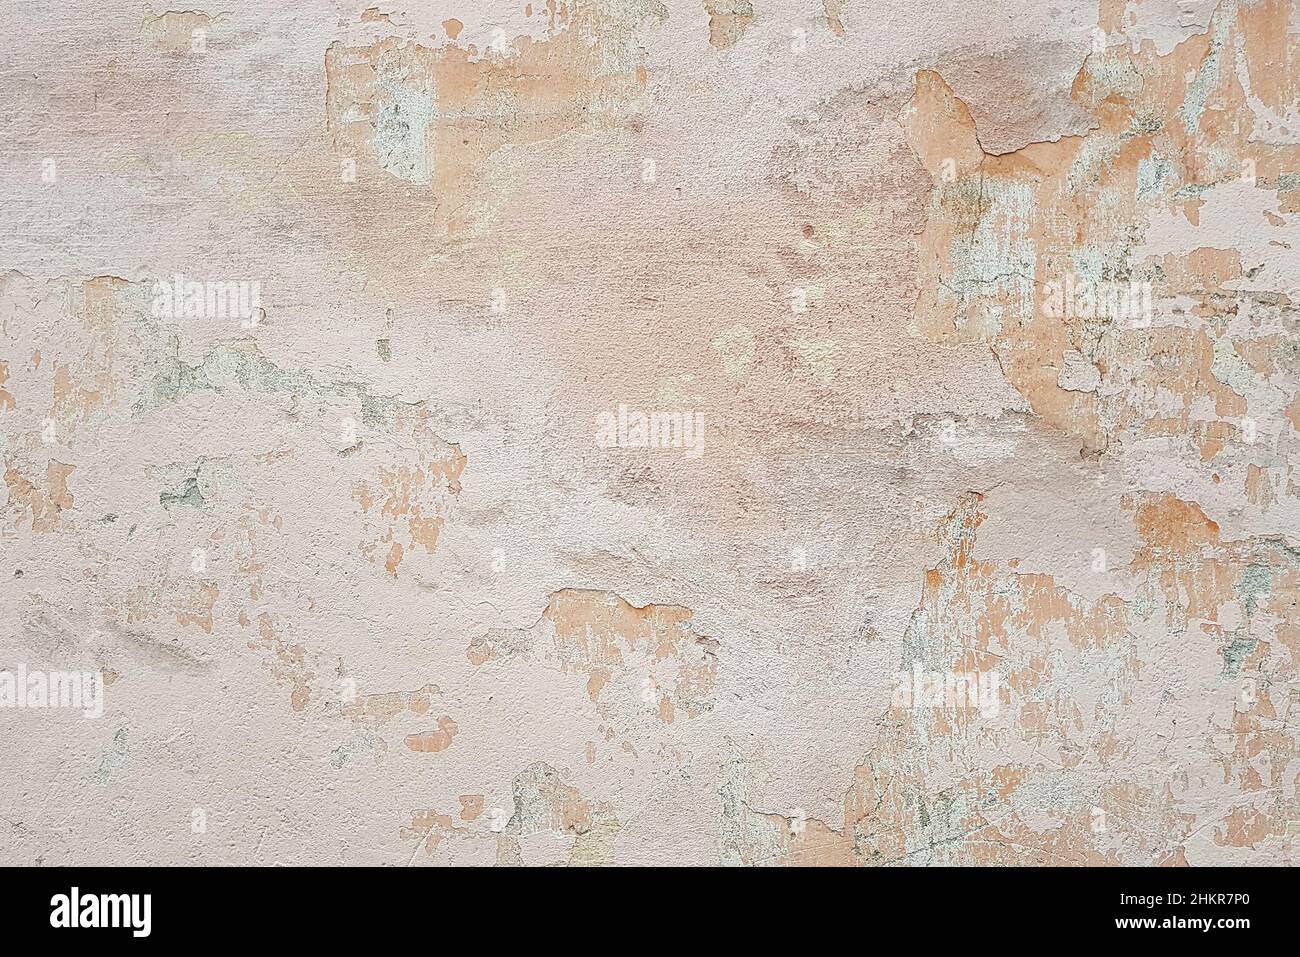 surface of old shabby wall with falling off plaster, beige-pink shades, background, texture Stock Photo